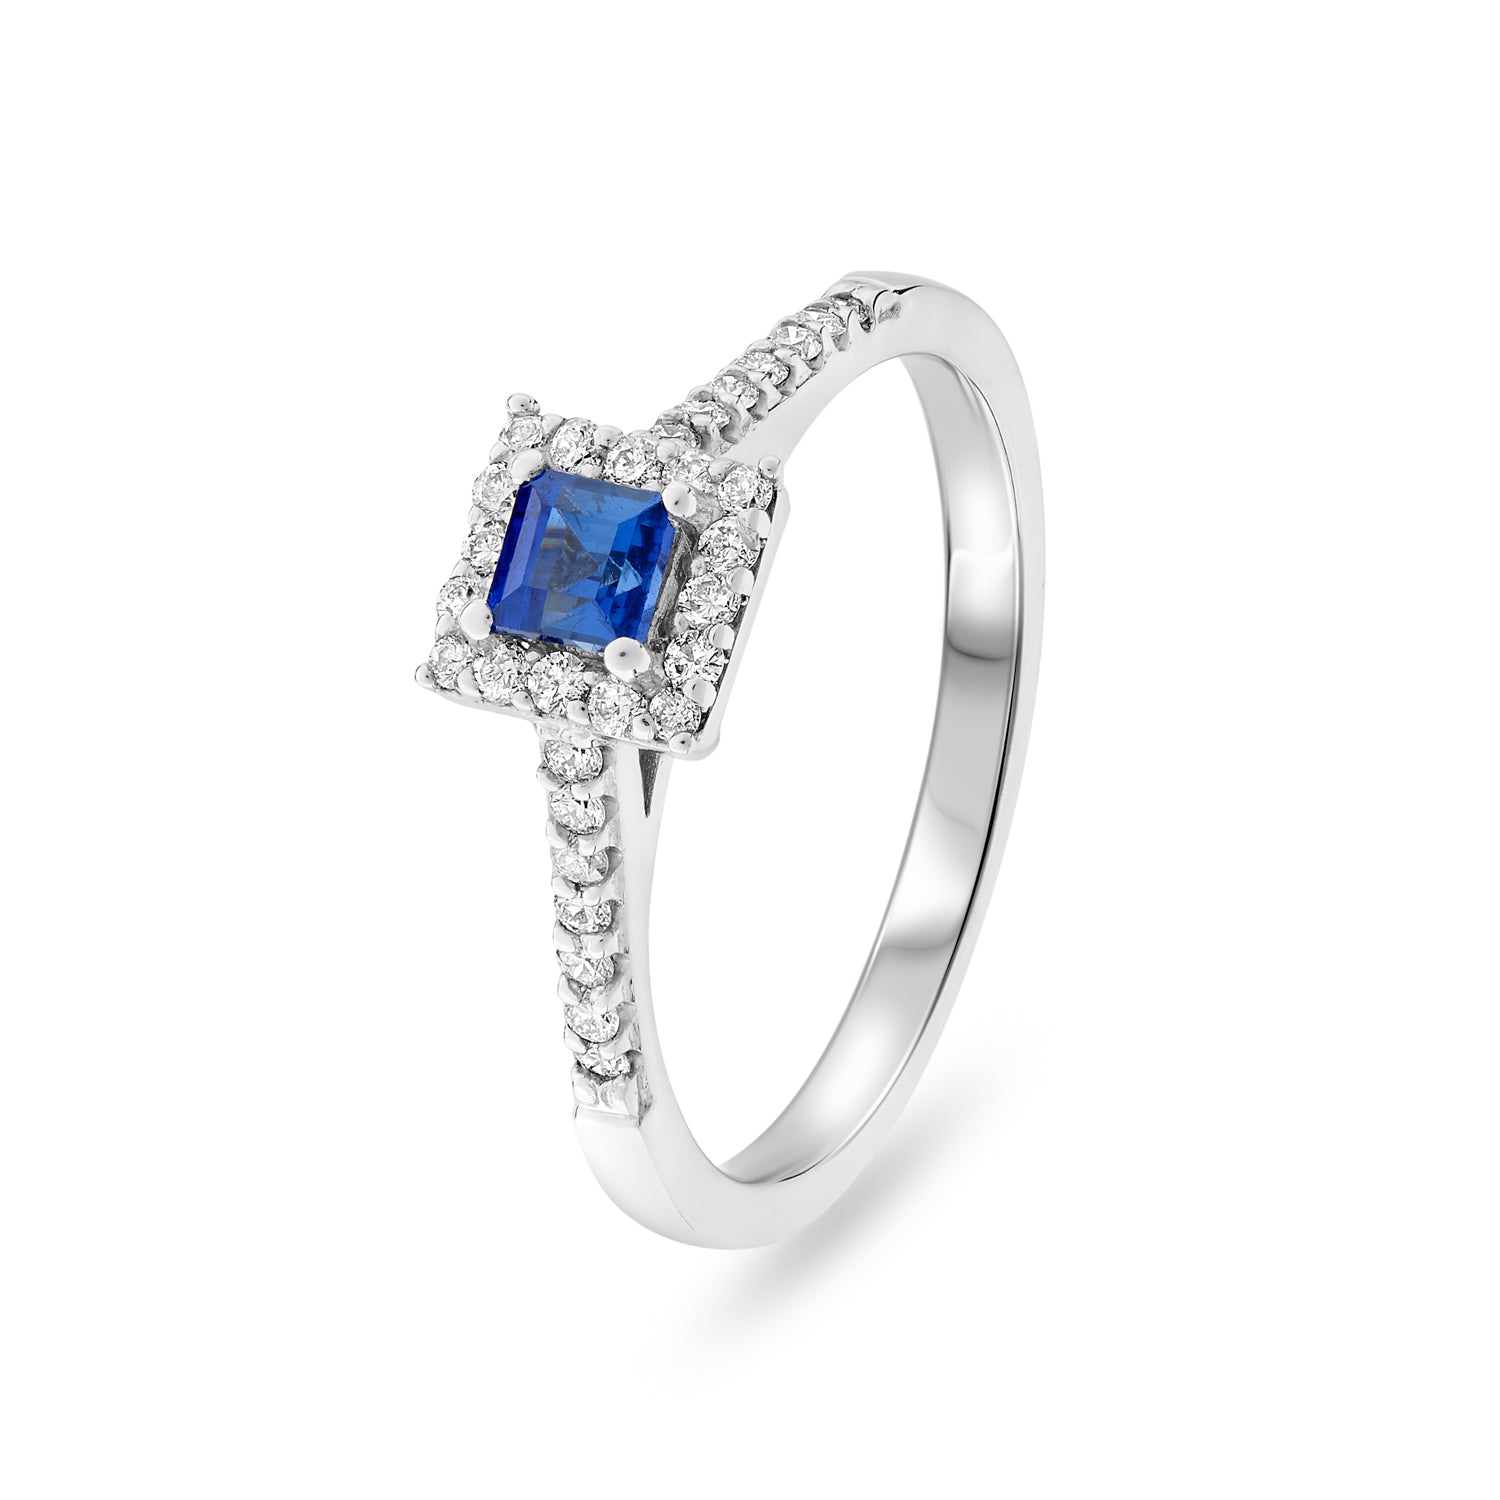 Diamond and Sapphire Ring With Diamond Set Shoulders. 0.22ct